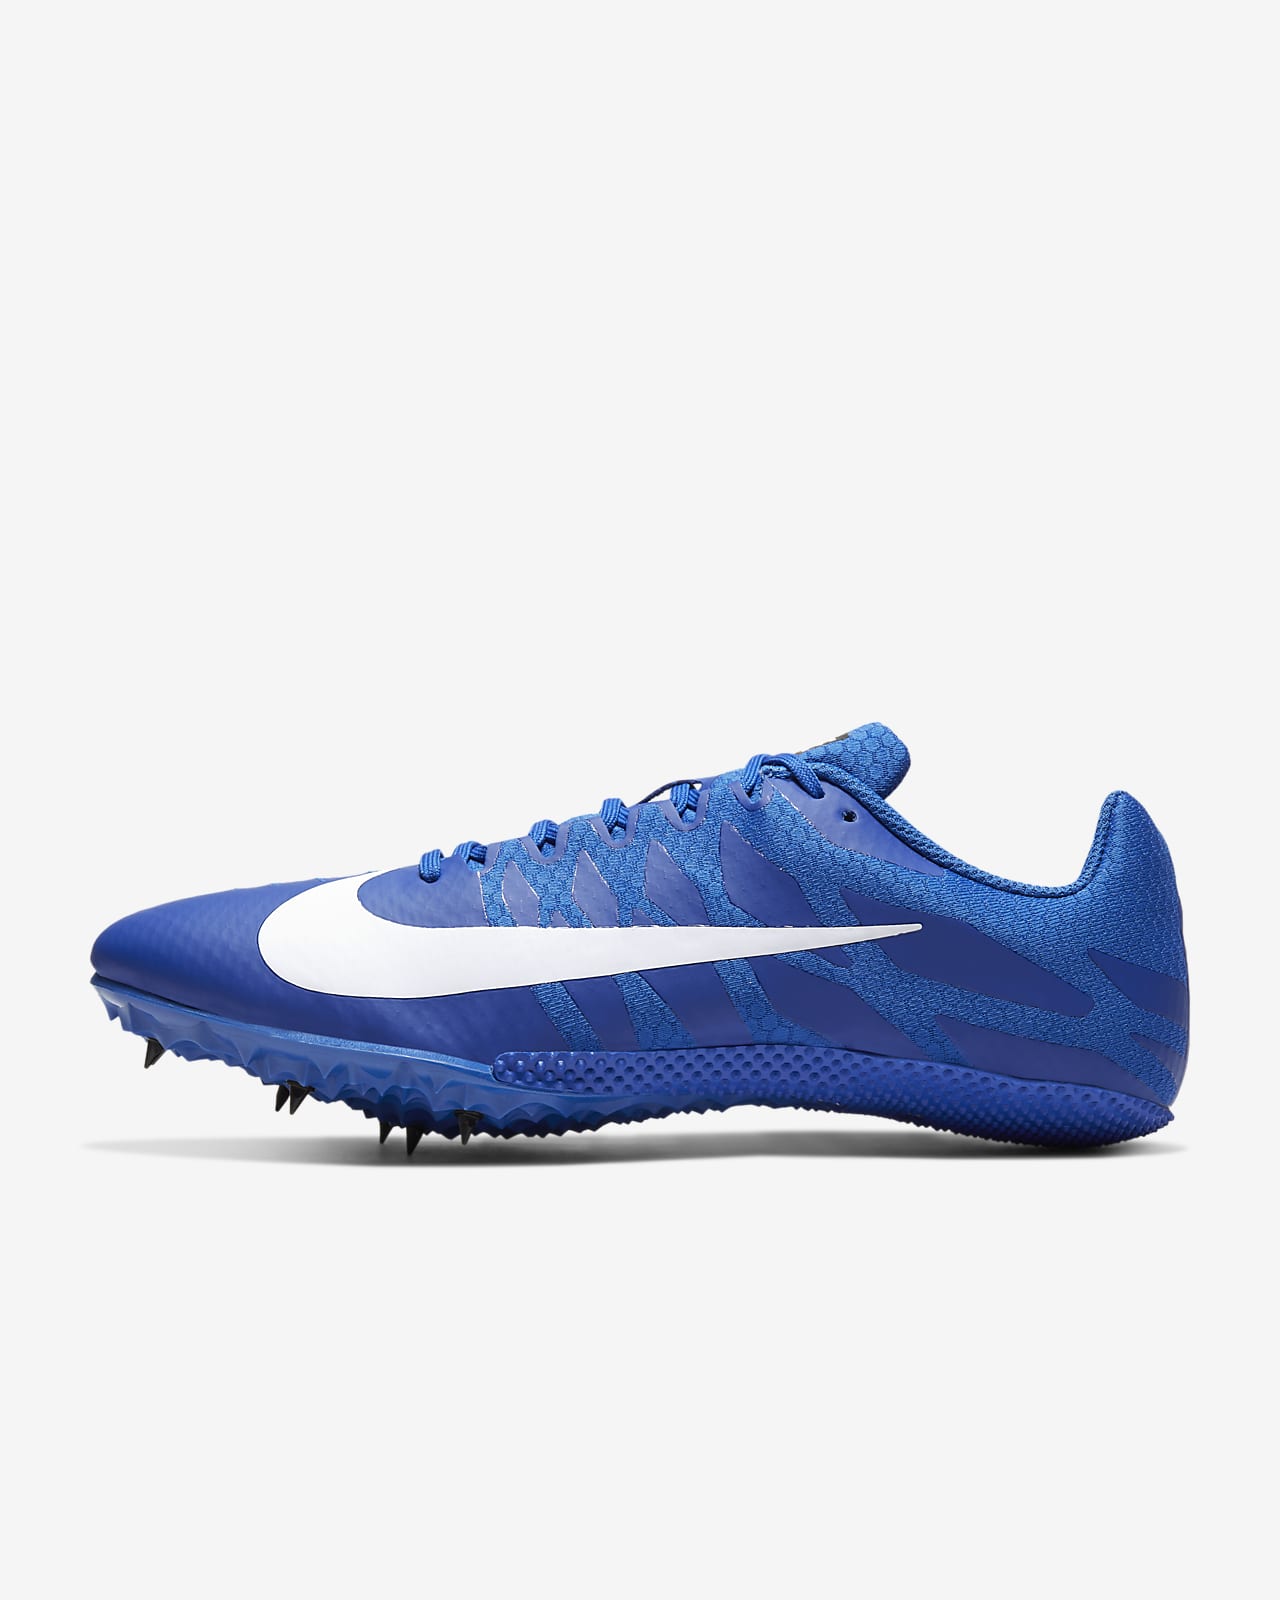 blue and white track spikes